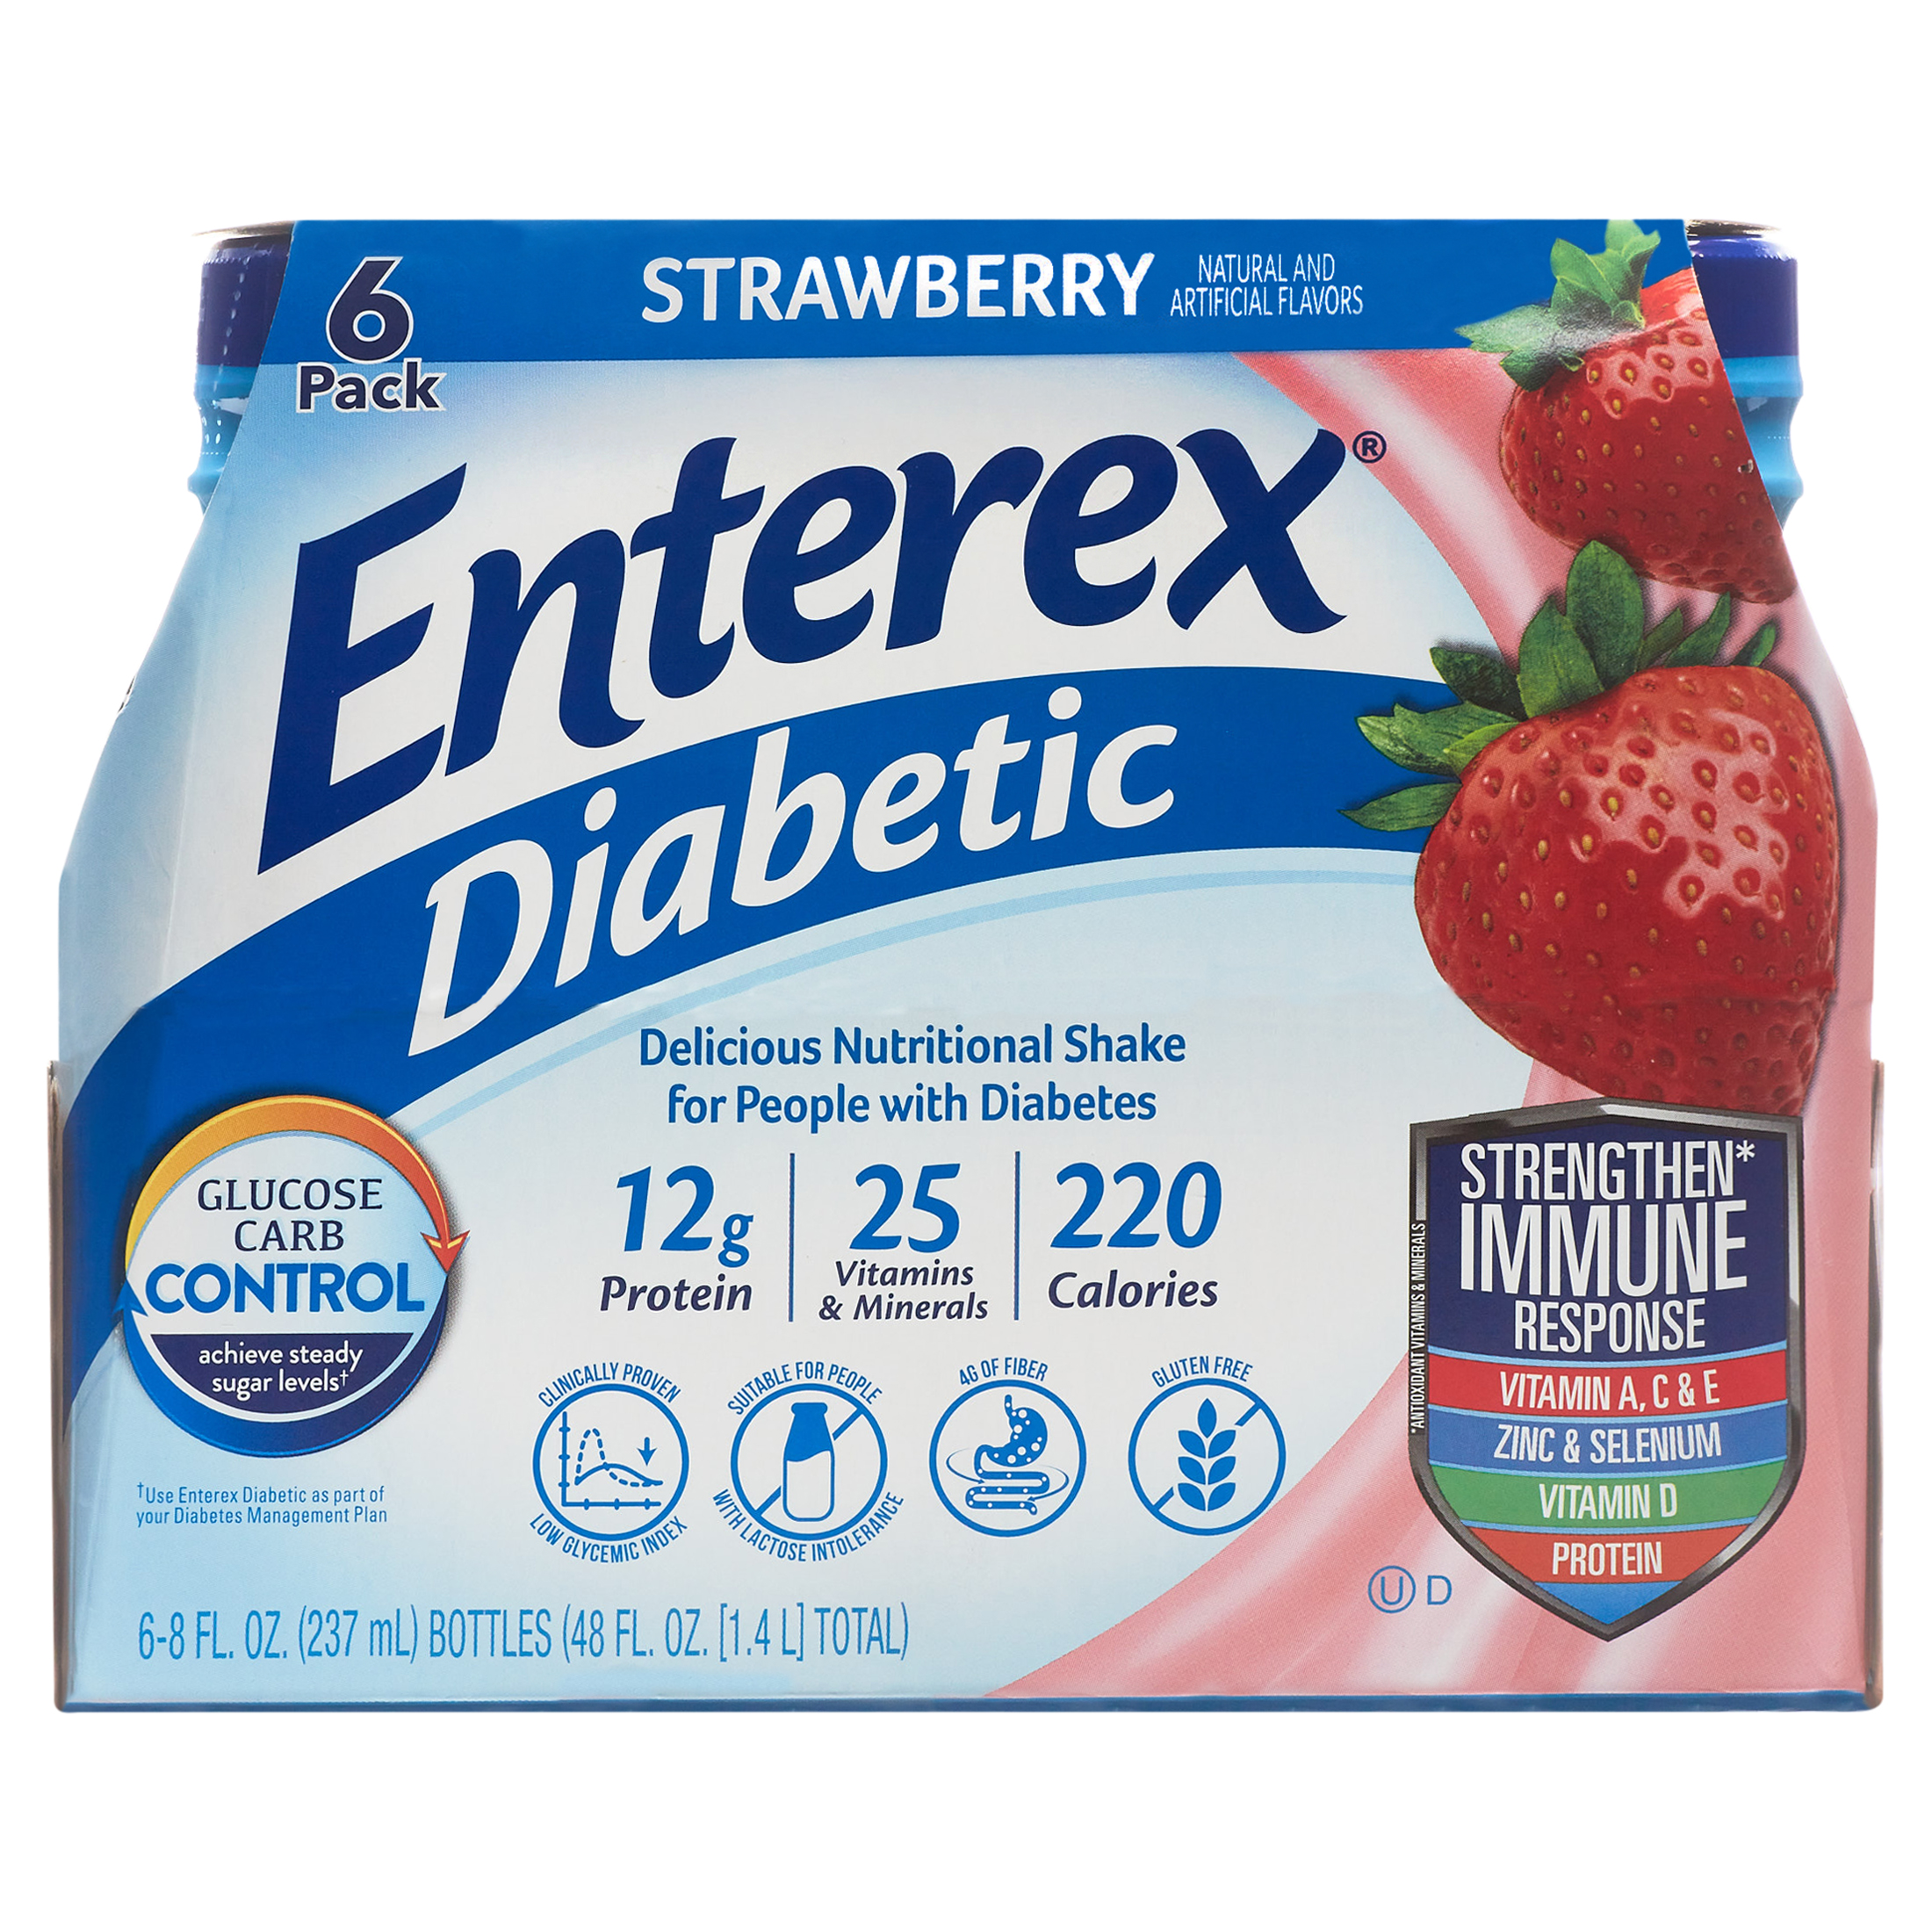 Enterex Diabetic Nutritional Meal Replacement Shake,For People with Diabetes,Strawberry , 8 fl oz, 6 Pack - image 3 of 9